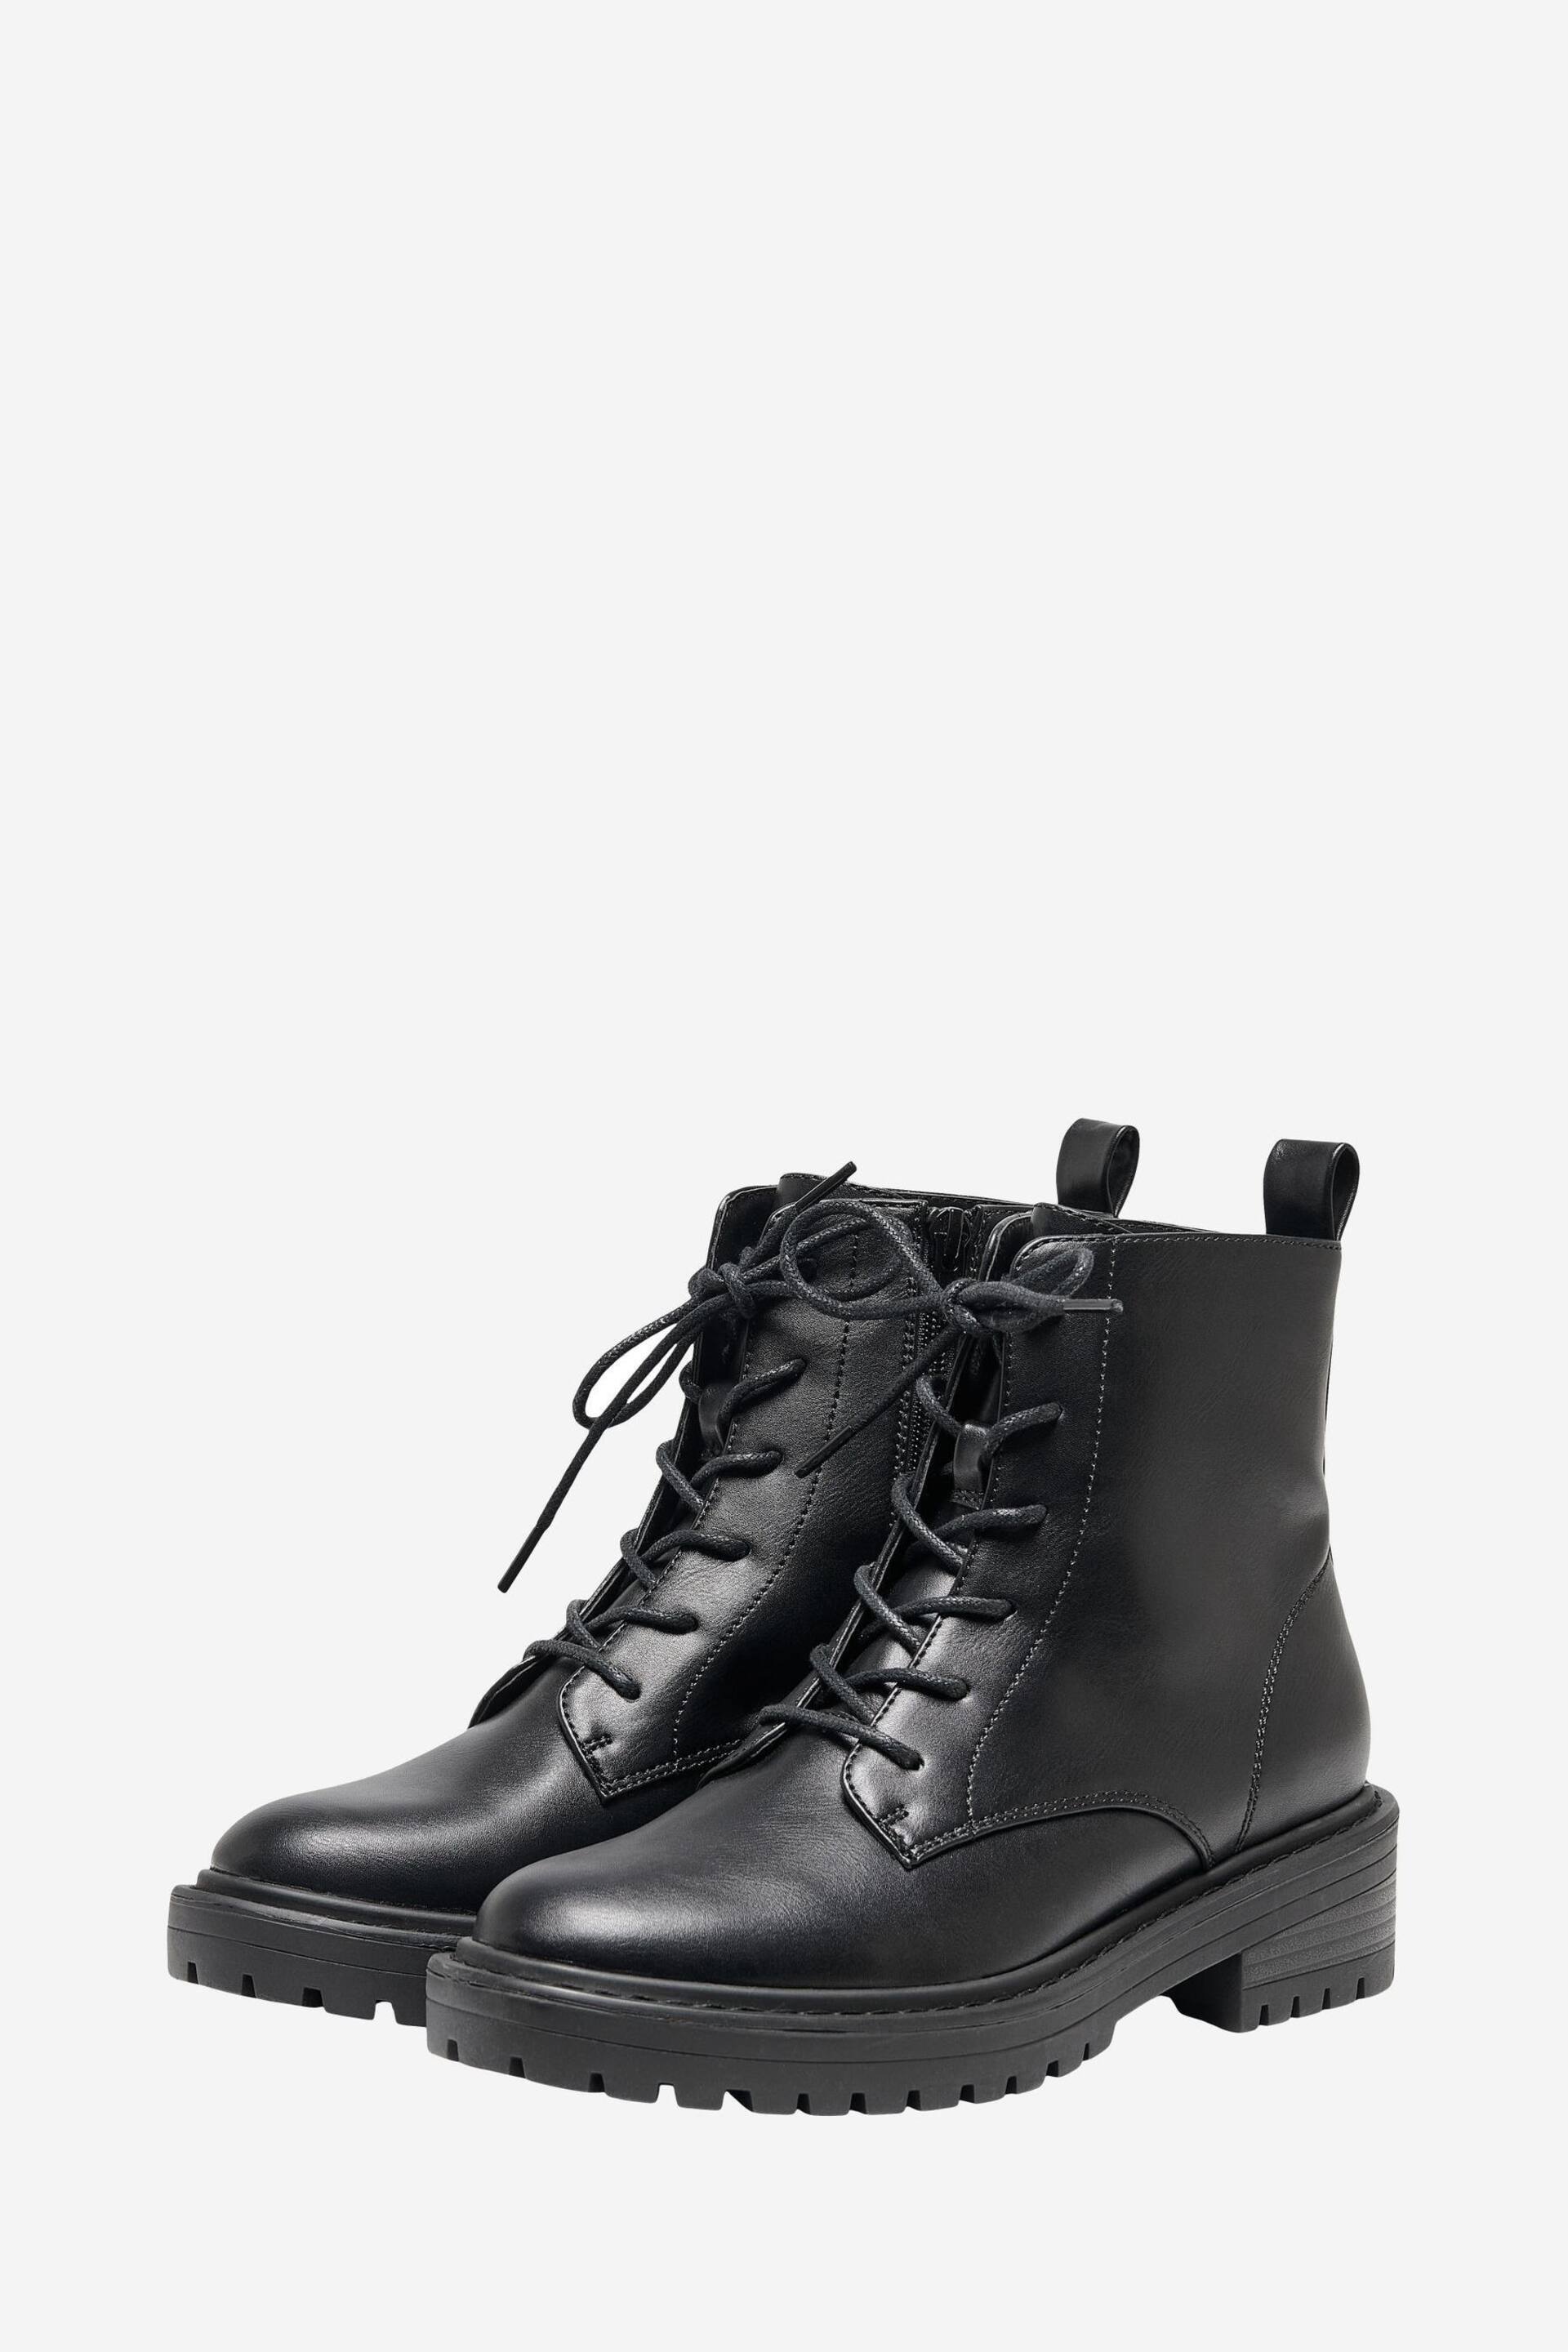 ONLY Black Faux Leather Lace Up Ankle Boot - Image 3 of 5